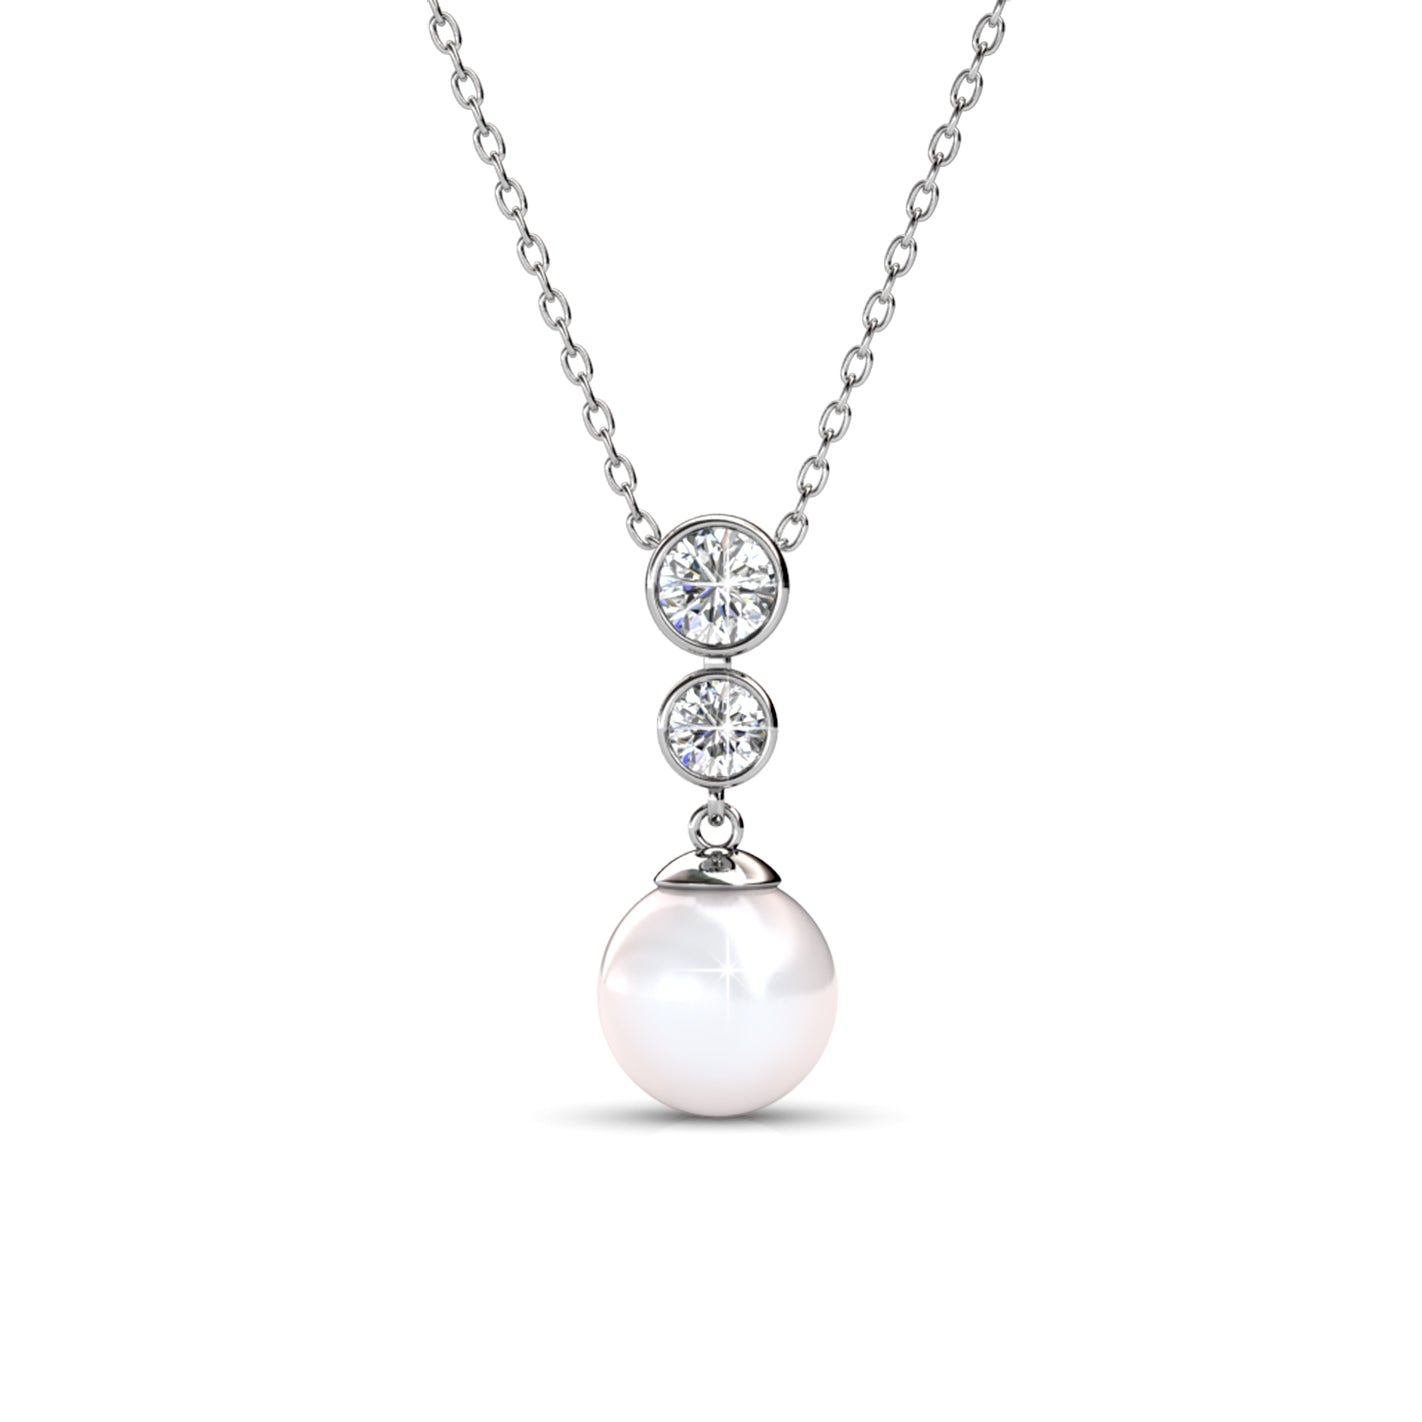 Genevieve "Sweet Pearl" 18k White Gold Plated Pendant Necklace with Swarovski Crystals - Fab Friday